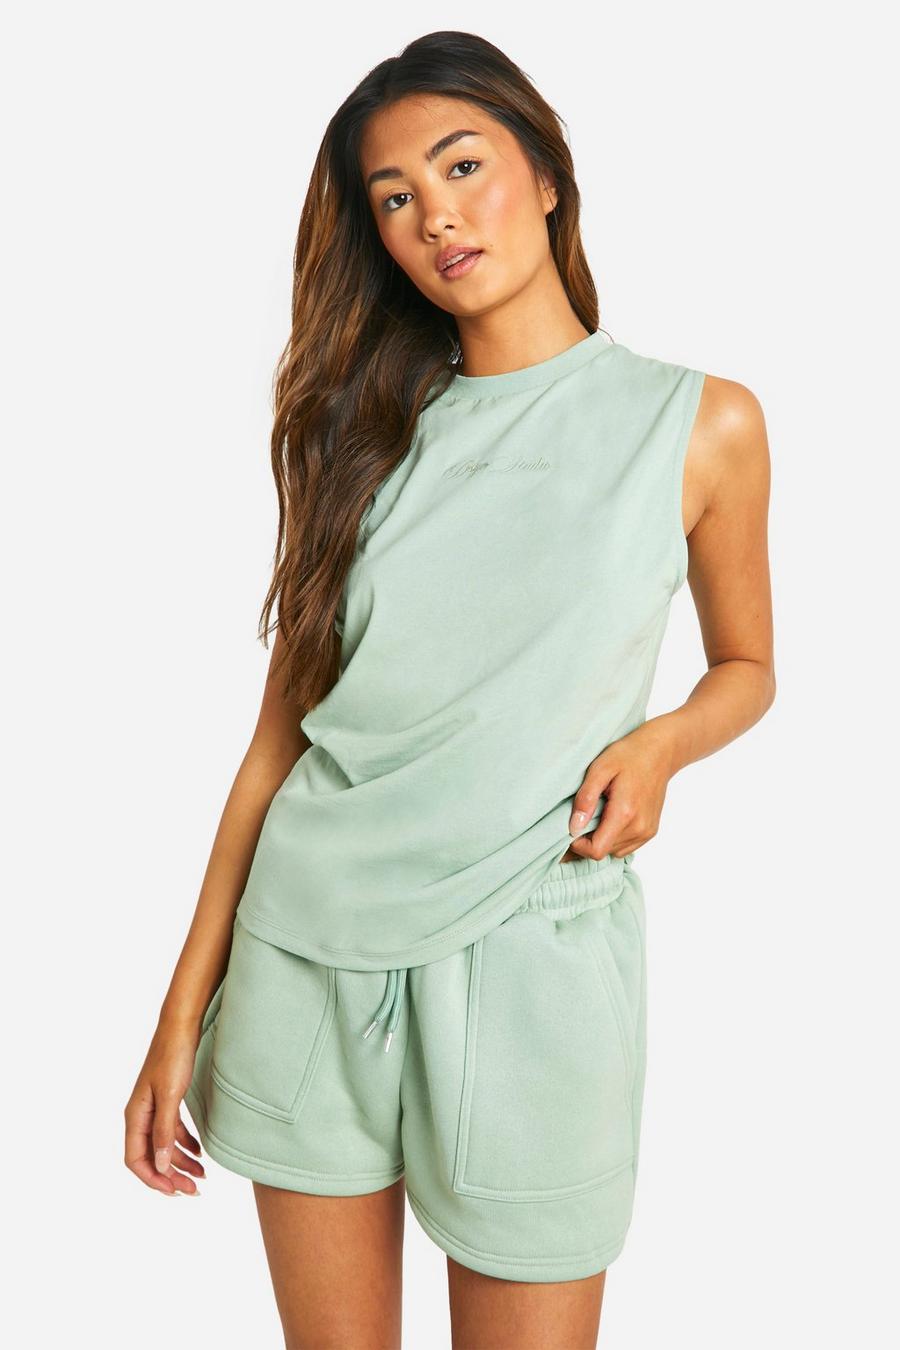 Sage Dsgn Studio Tonal Embroidered Sleeveless Top And Short Set